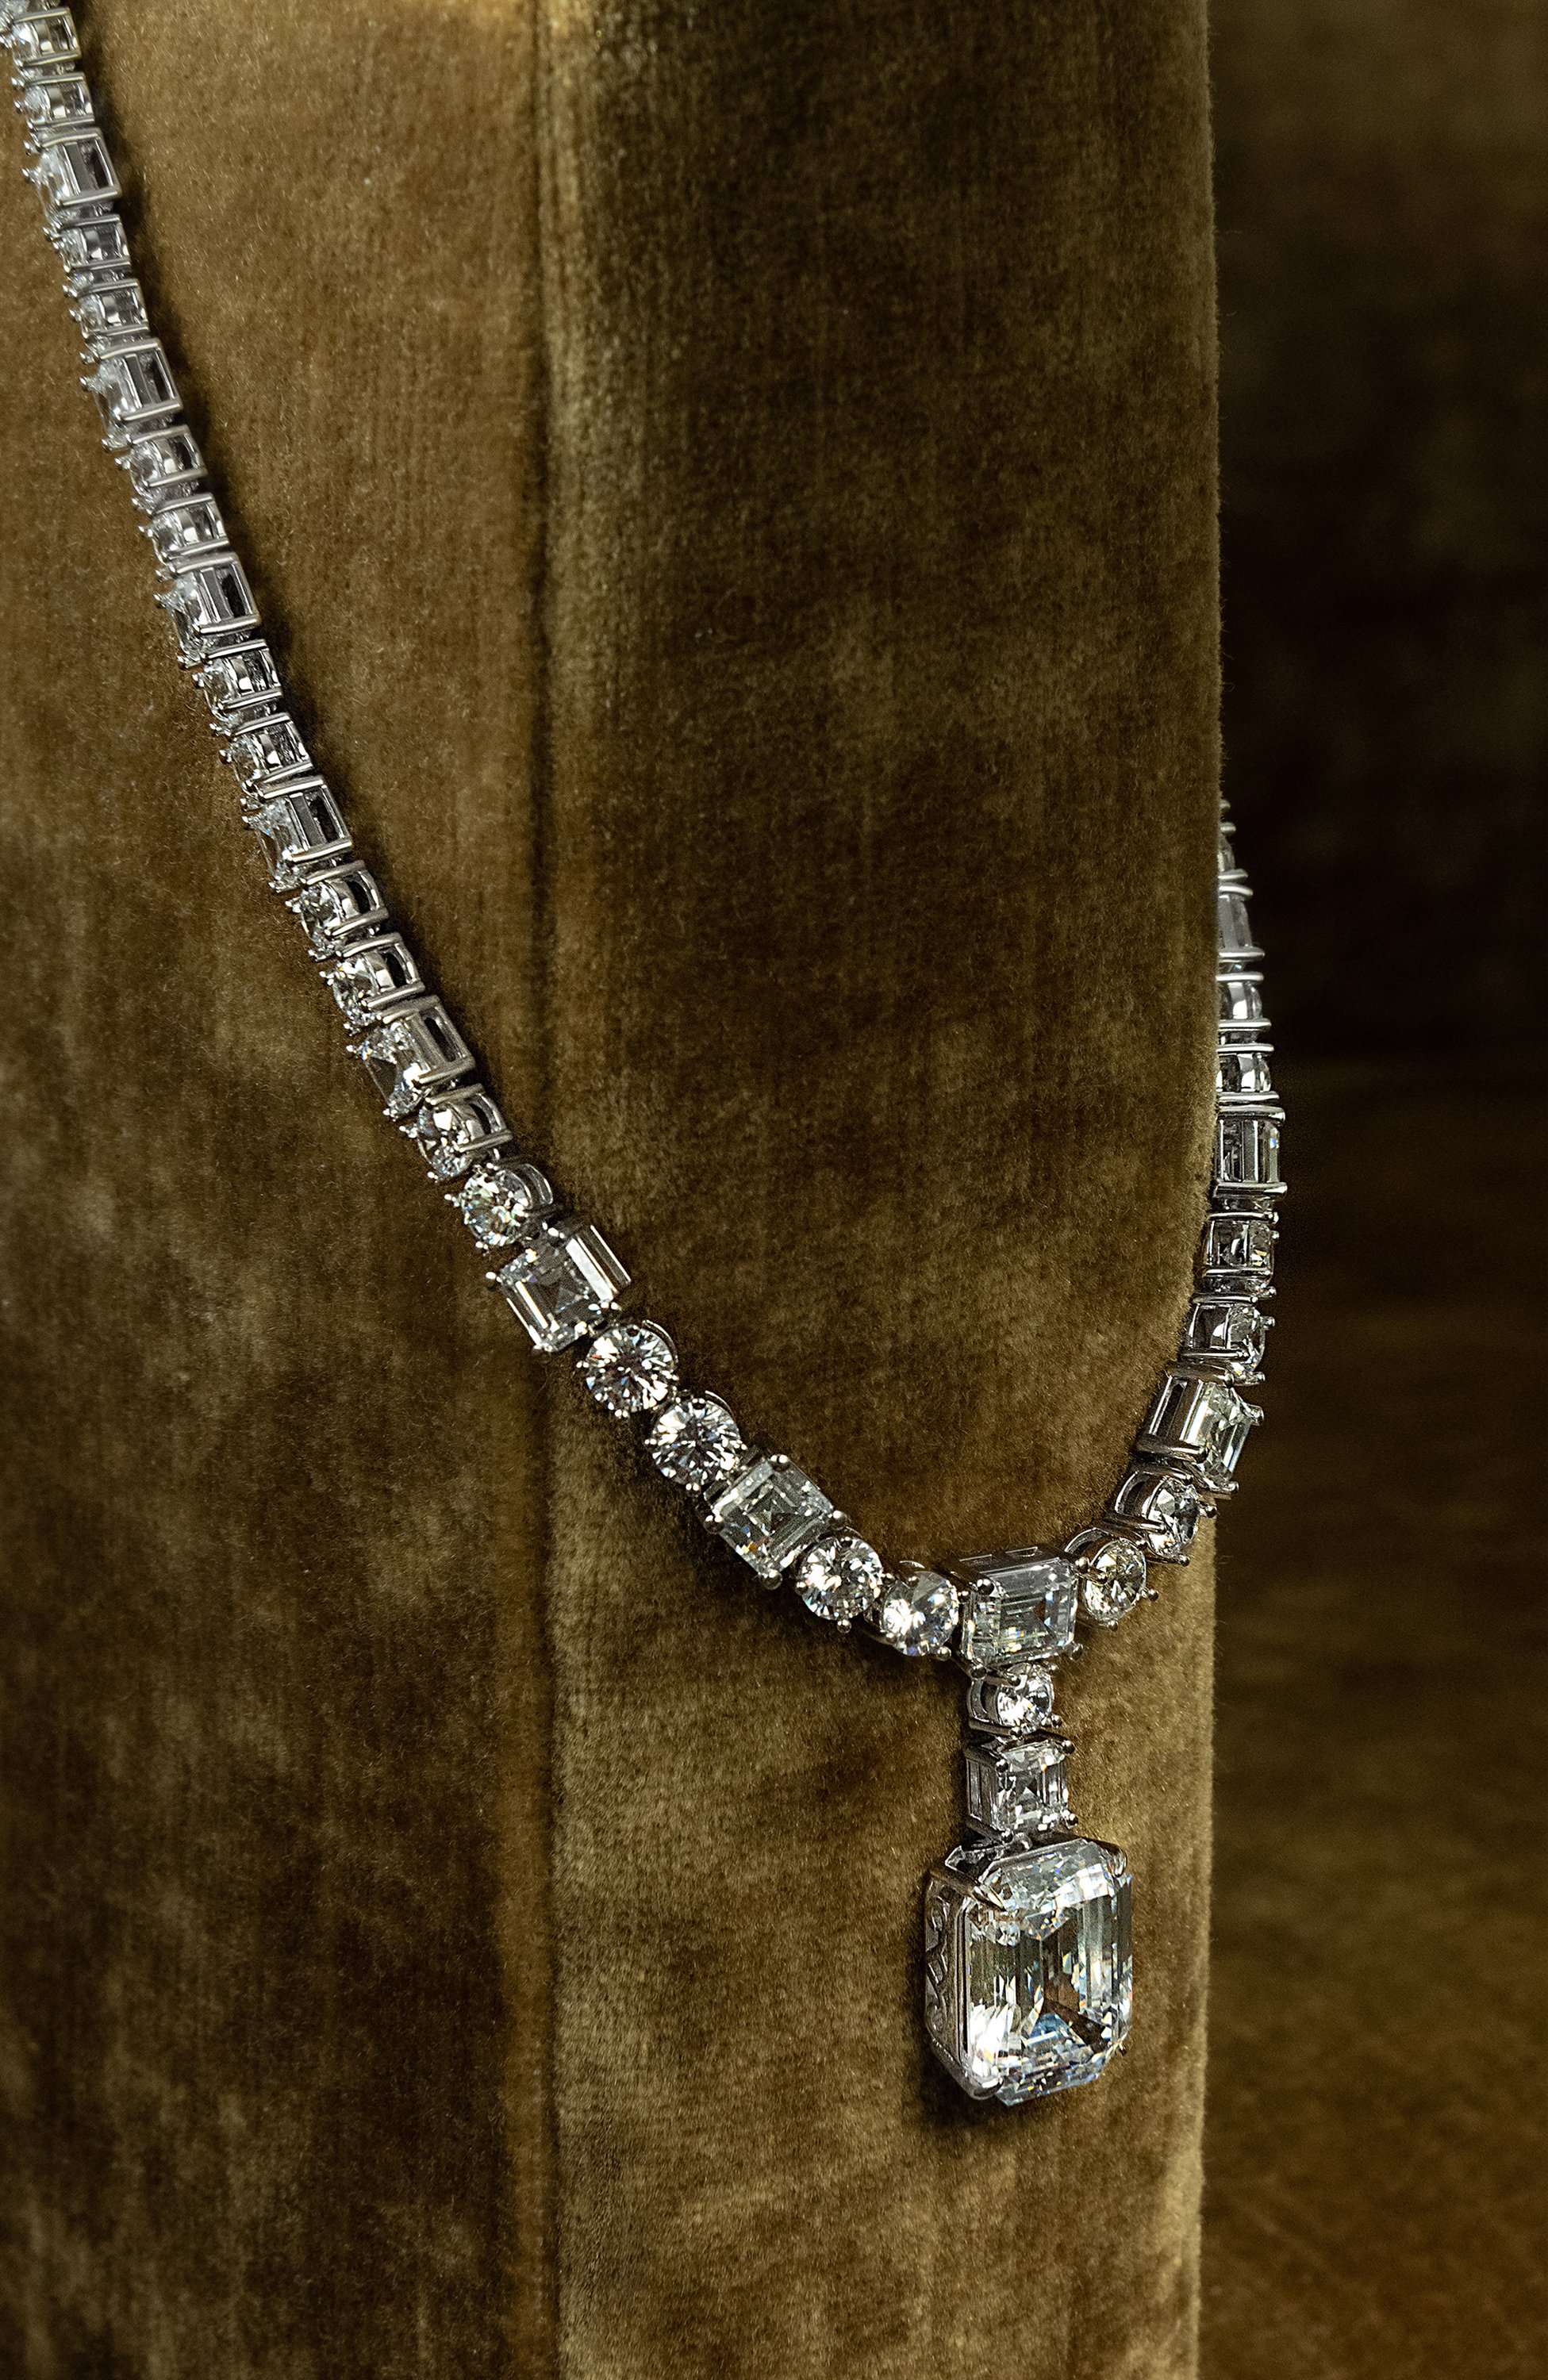 Diamond Necklace - photo by Andrew Werner.jpg